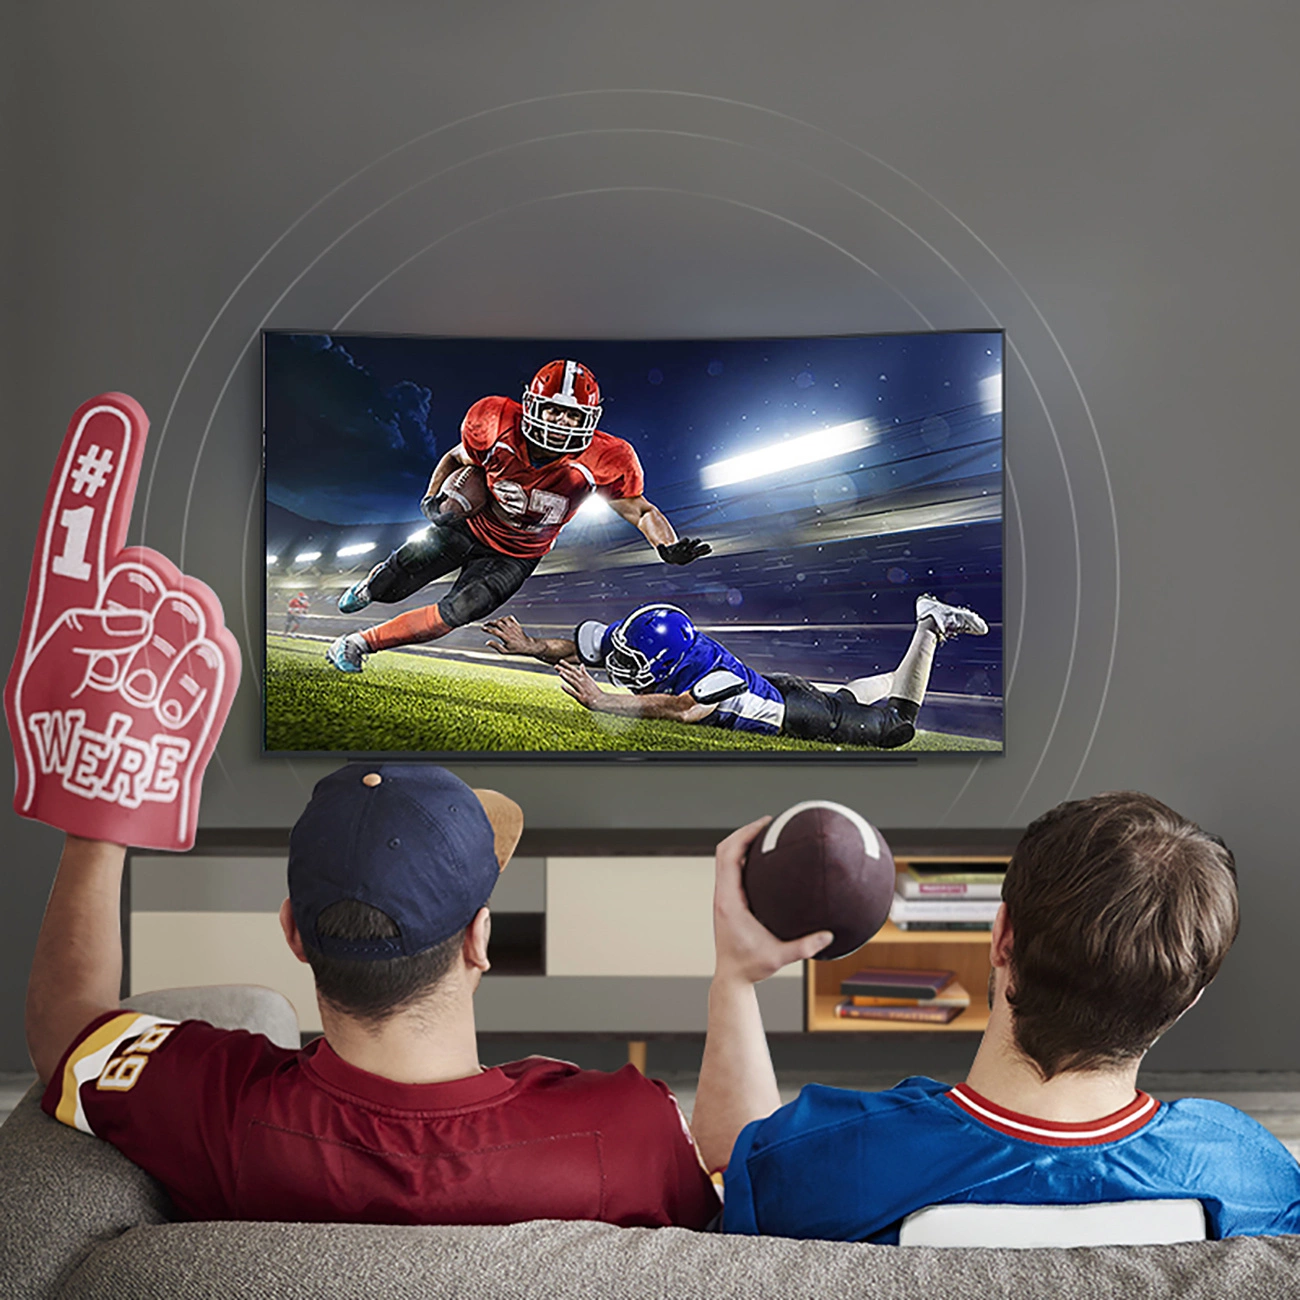 Two men watch American football on a TV that is connected to a home theater using a Ugreen AV122 optical cable.